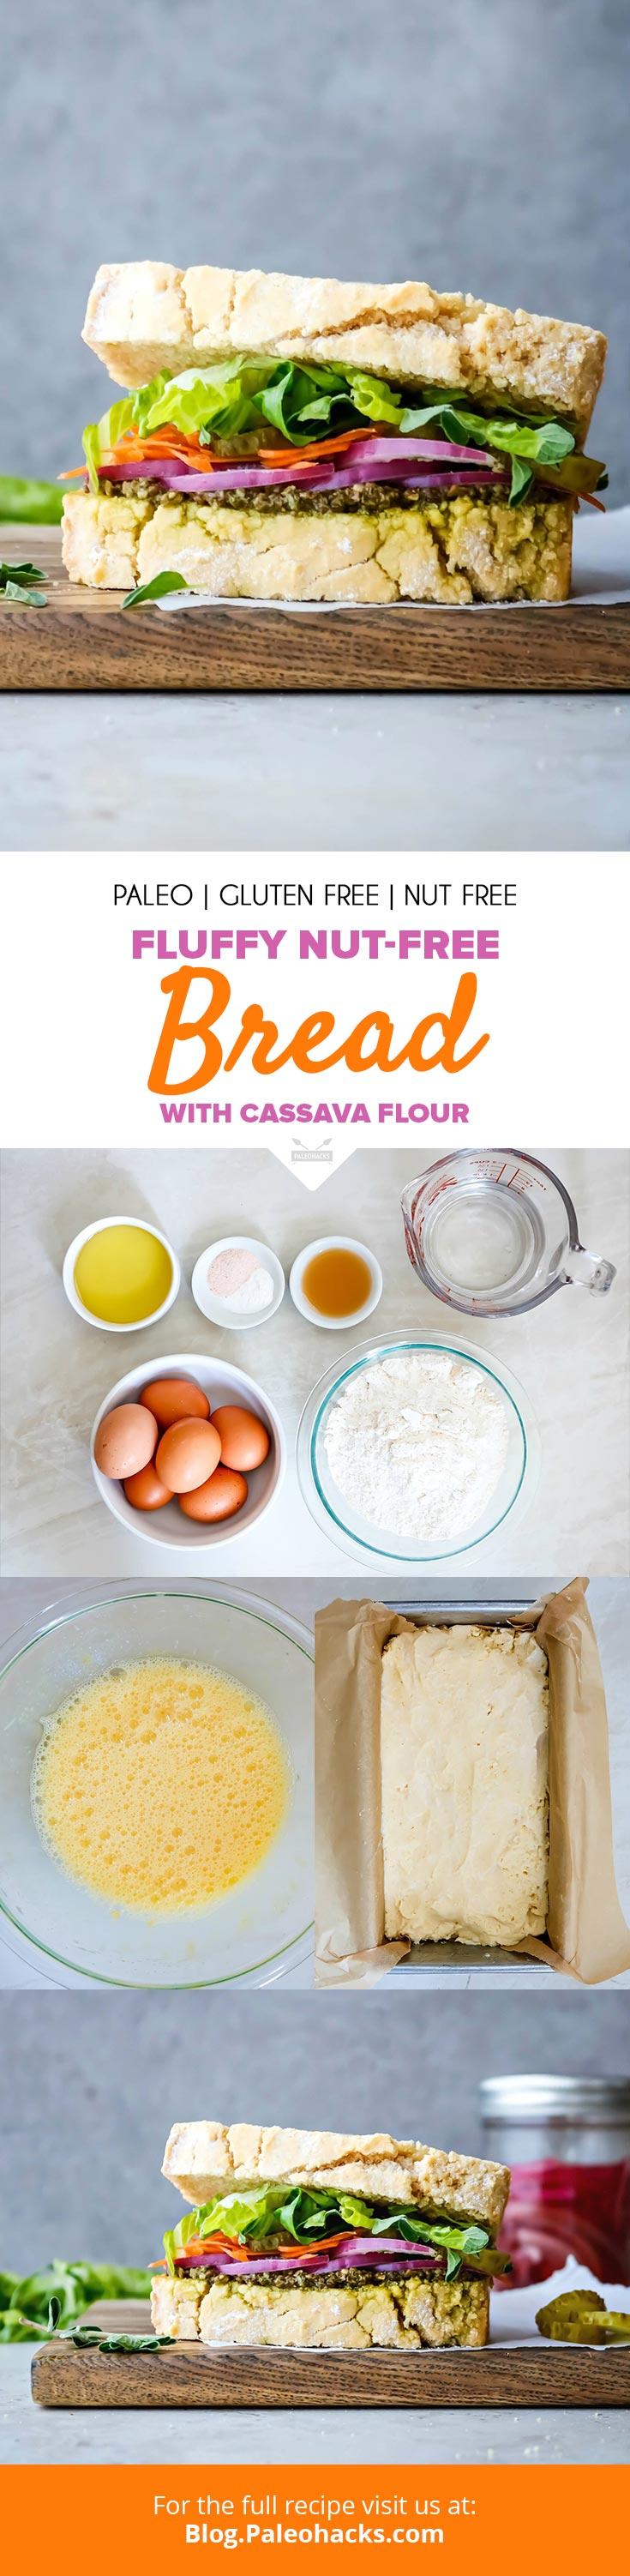 Looking for the perfect sandwich bread to answer all your Paleo needs? Check out this protein-packed Cassava Bread for a gluten-free and nut-free alternative!